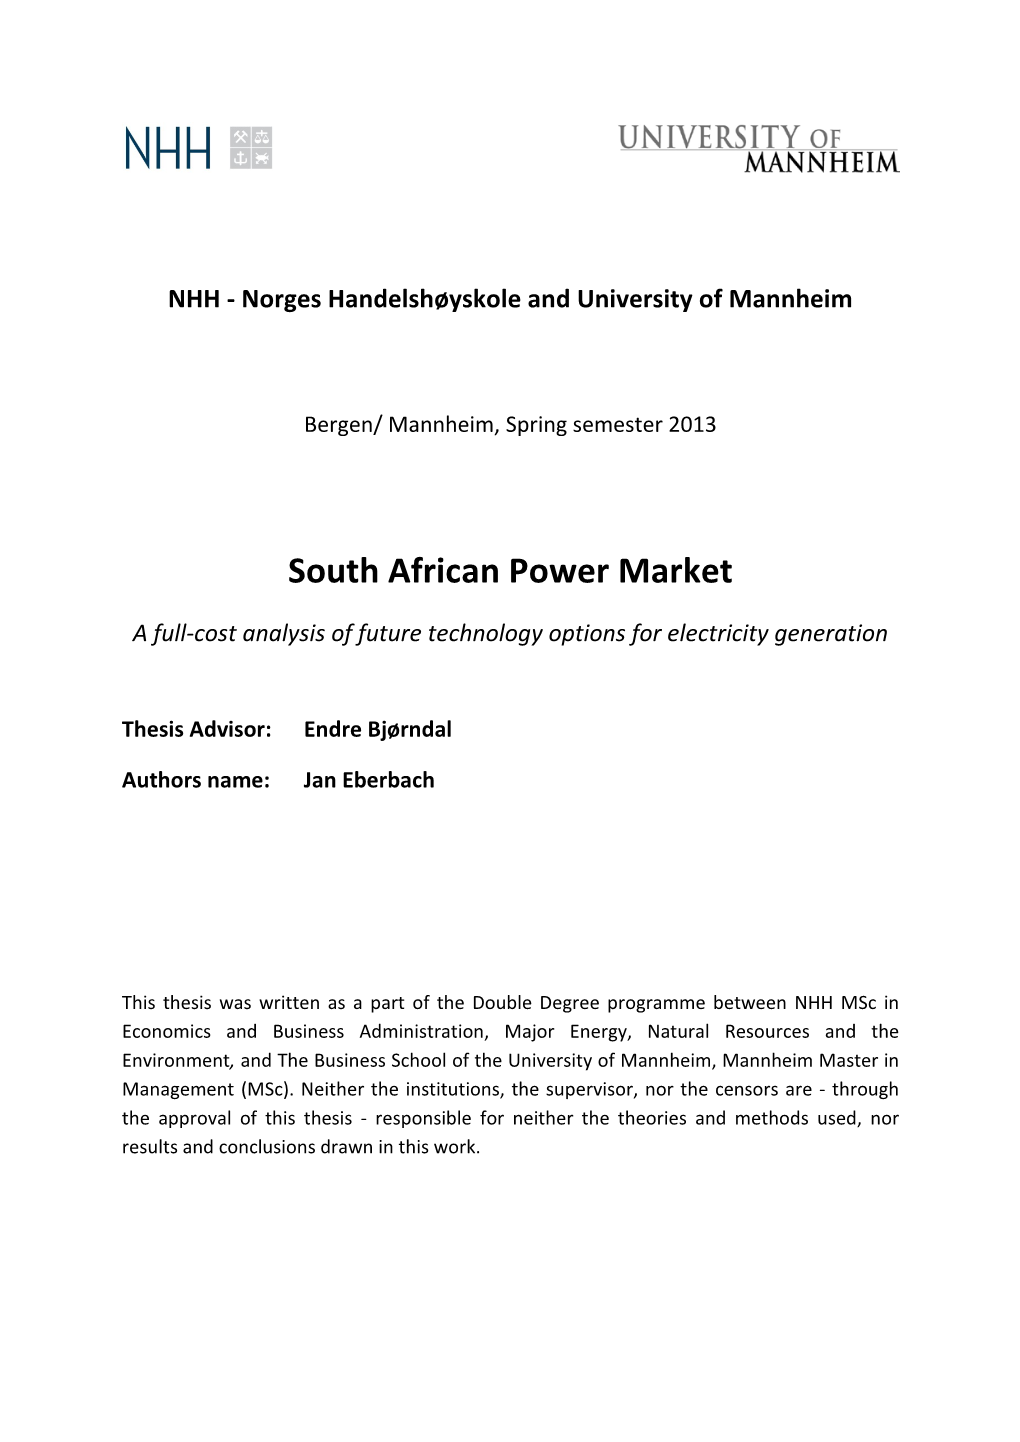 South African Power Market